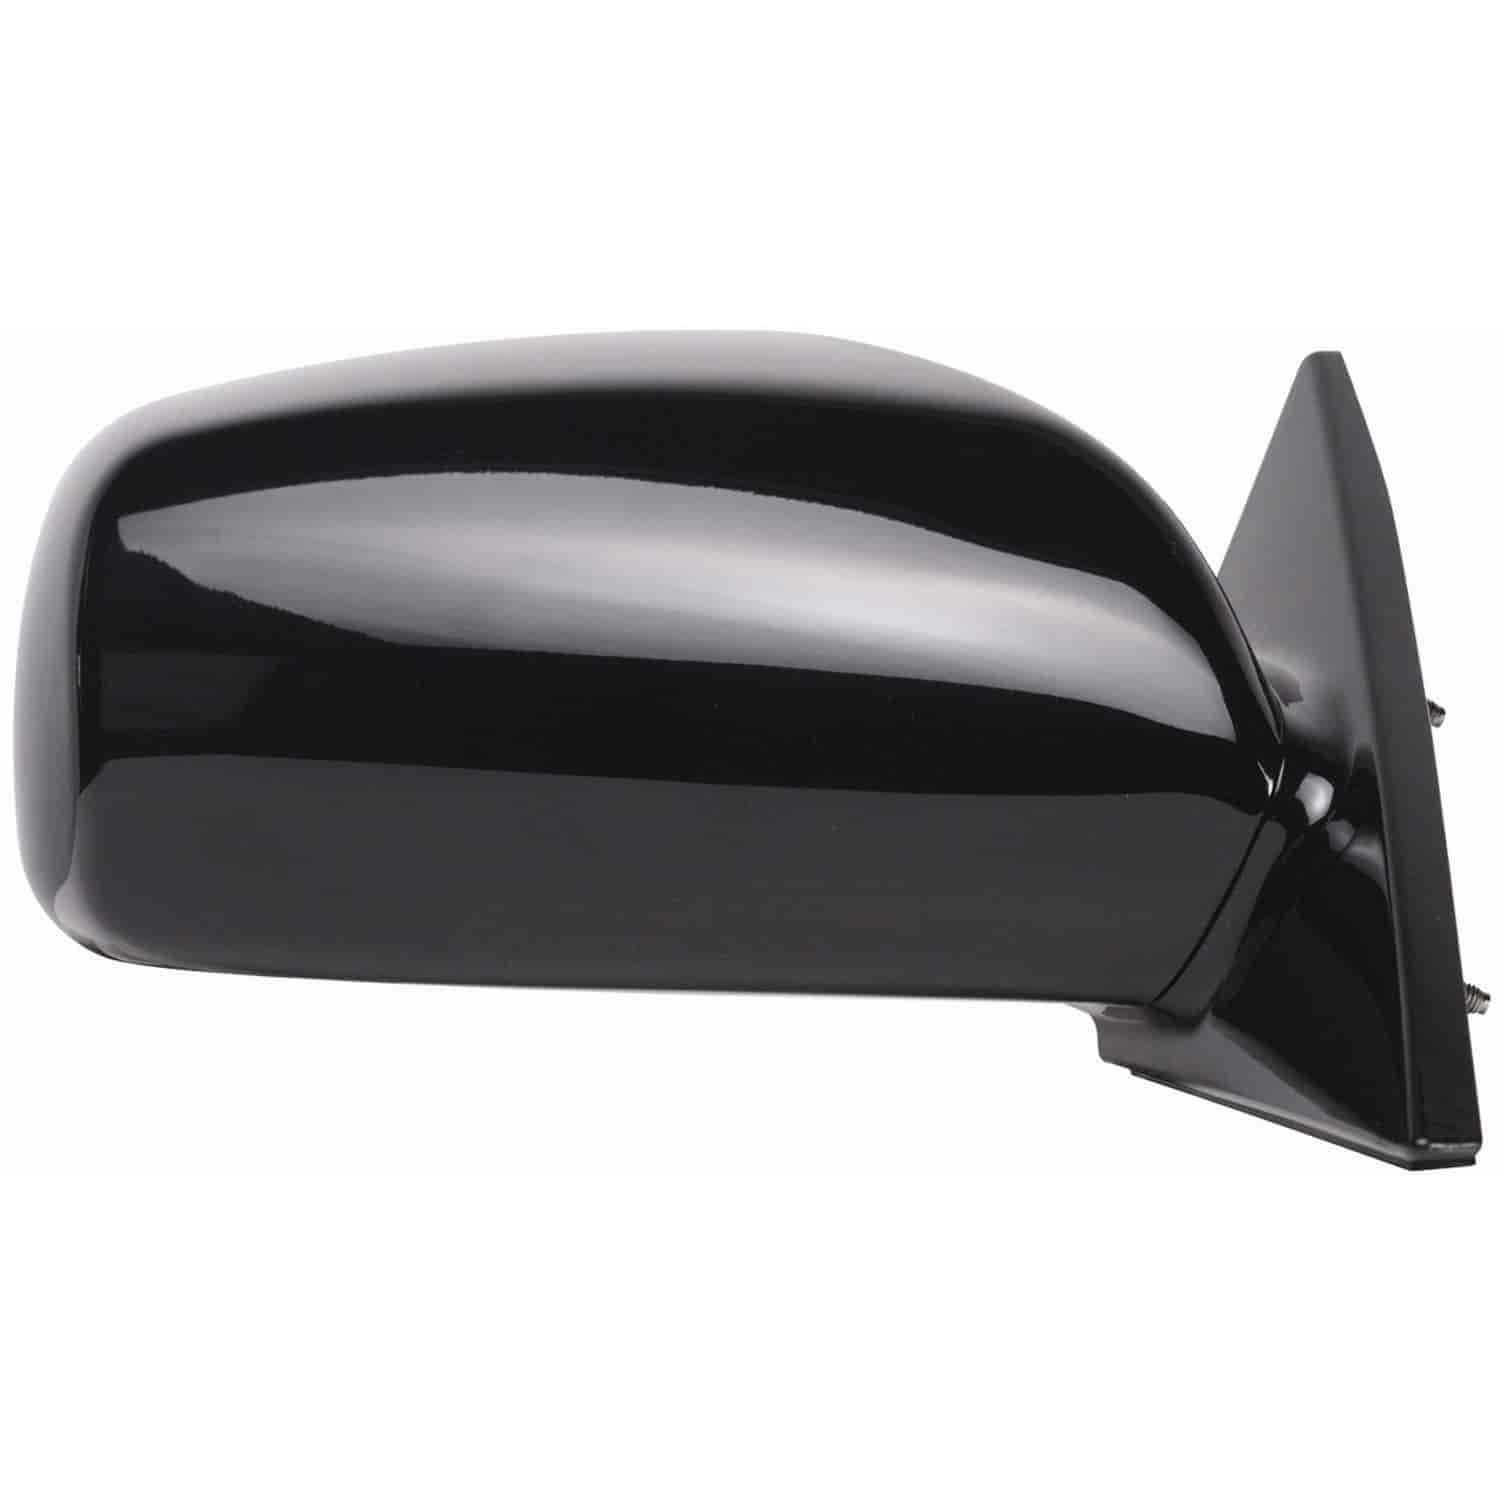 OEM Style Replacement mirror for 04-08 Toyota Solara